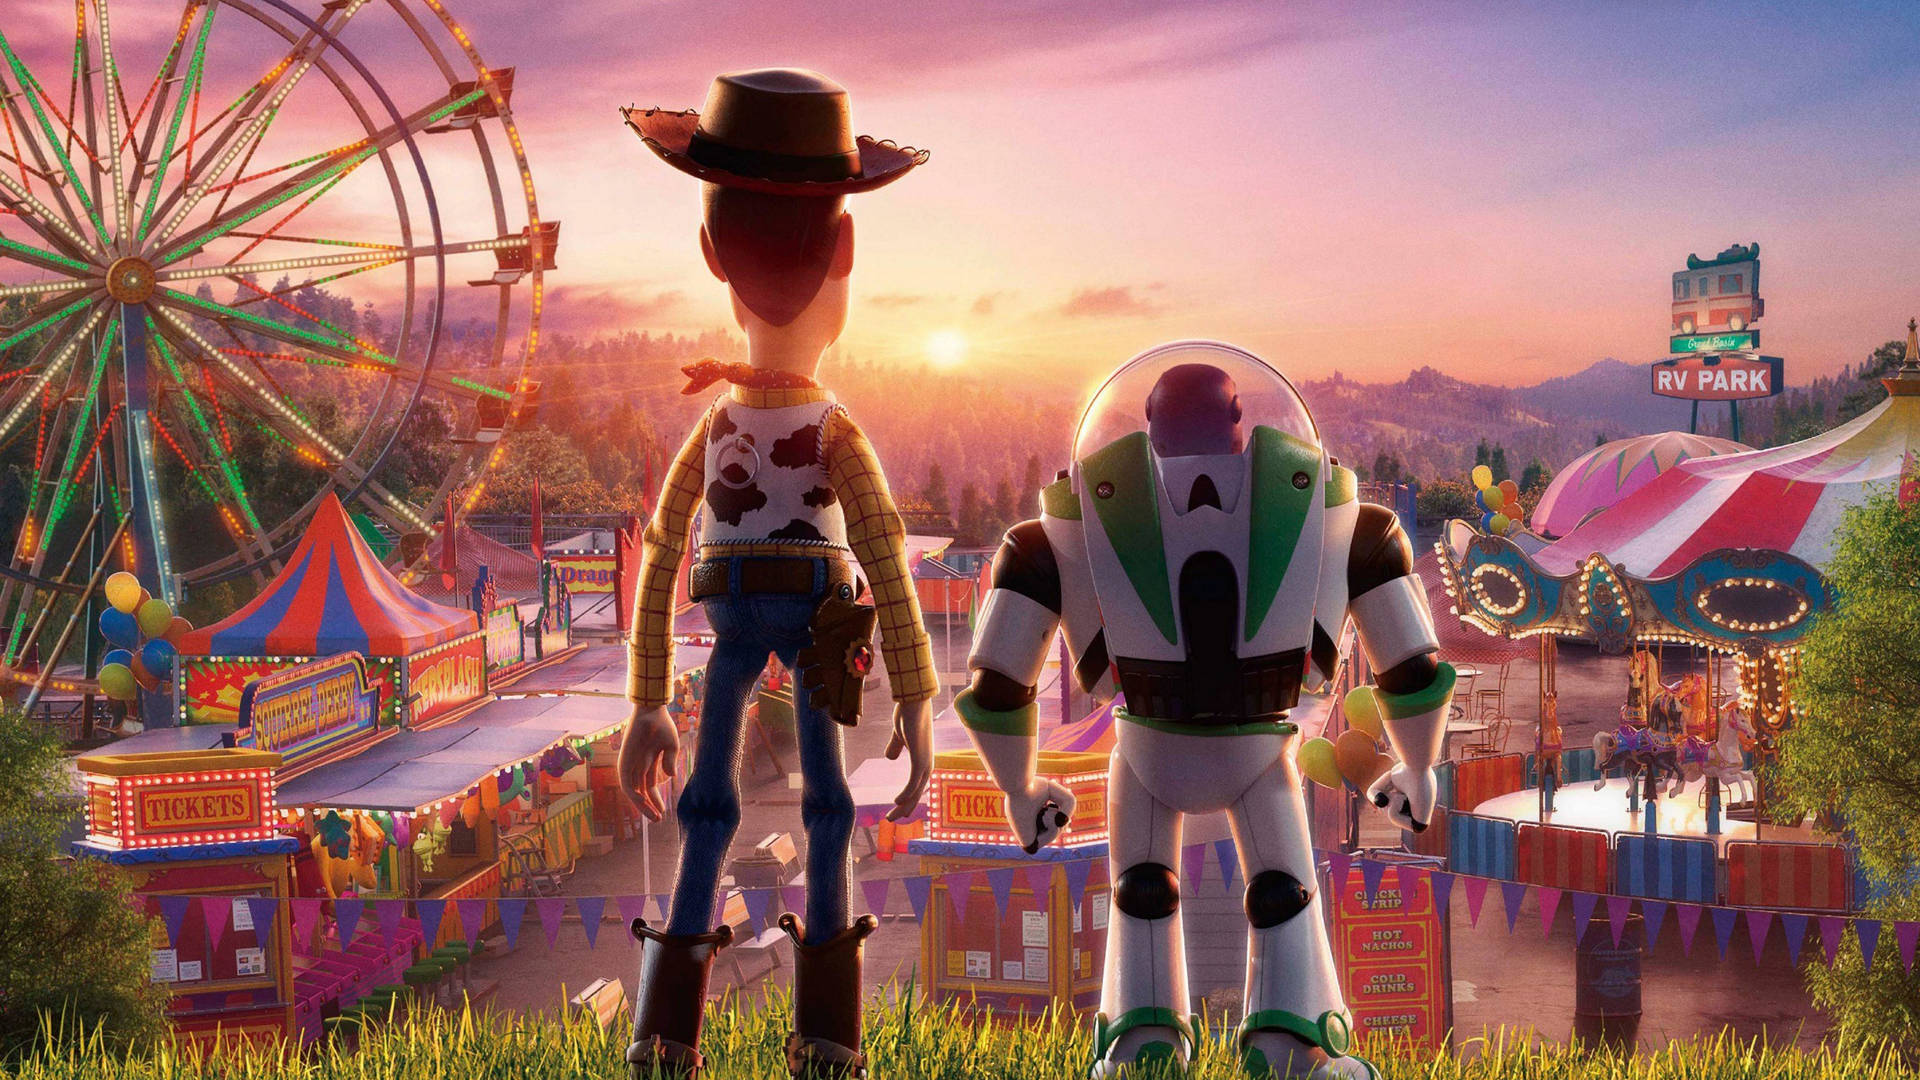 Woody And Lightyear Facing Sunset Wallpaper